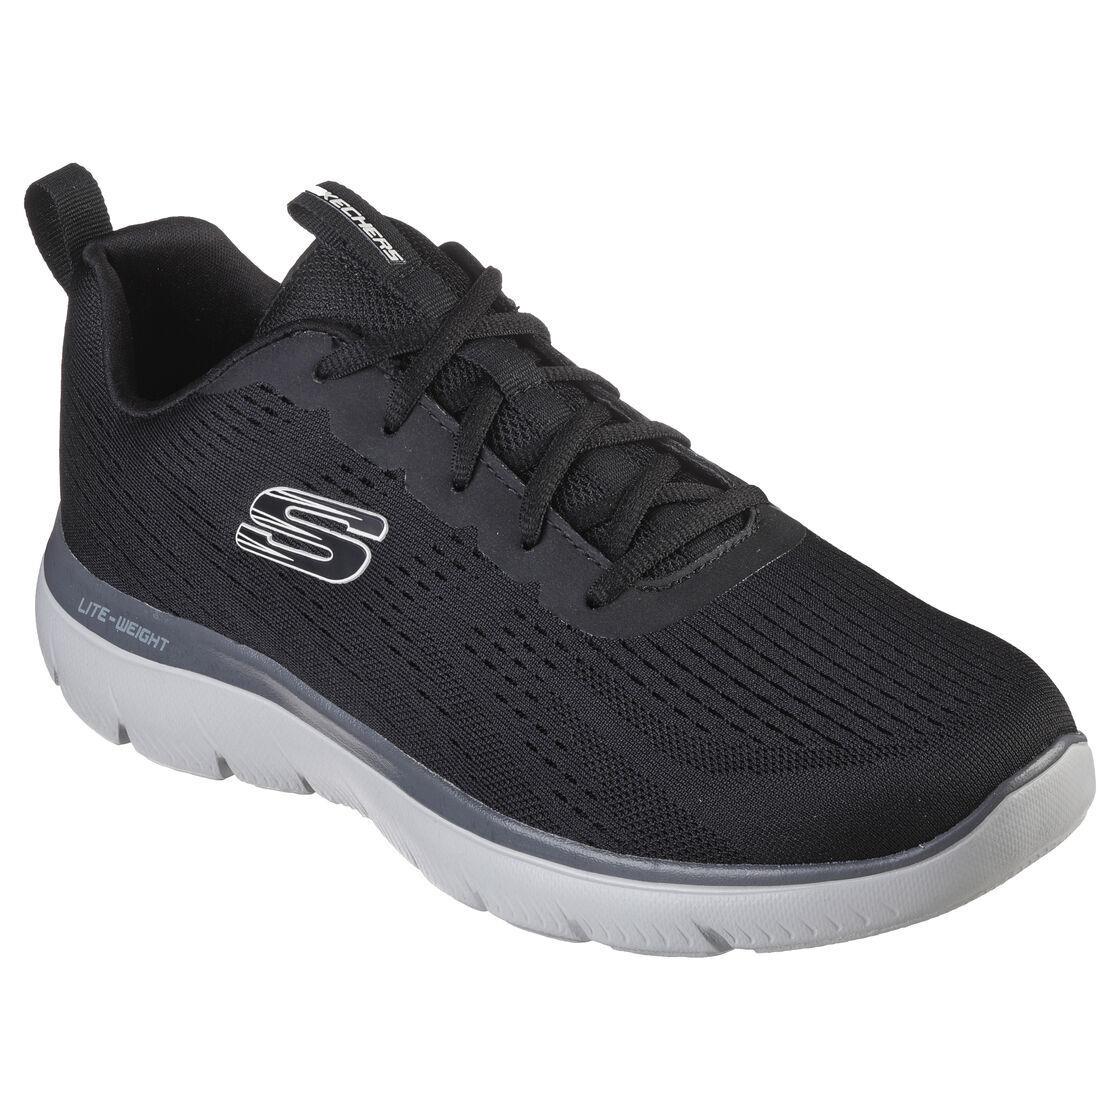 Man Skechers Summits Torre 232395 Lace-up Shoe Color Black/charcoal - Black/Charcoal